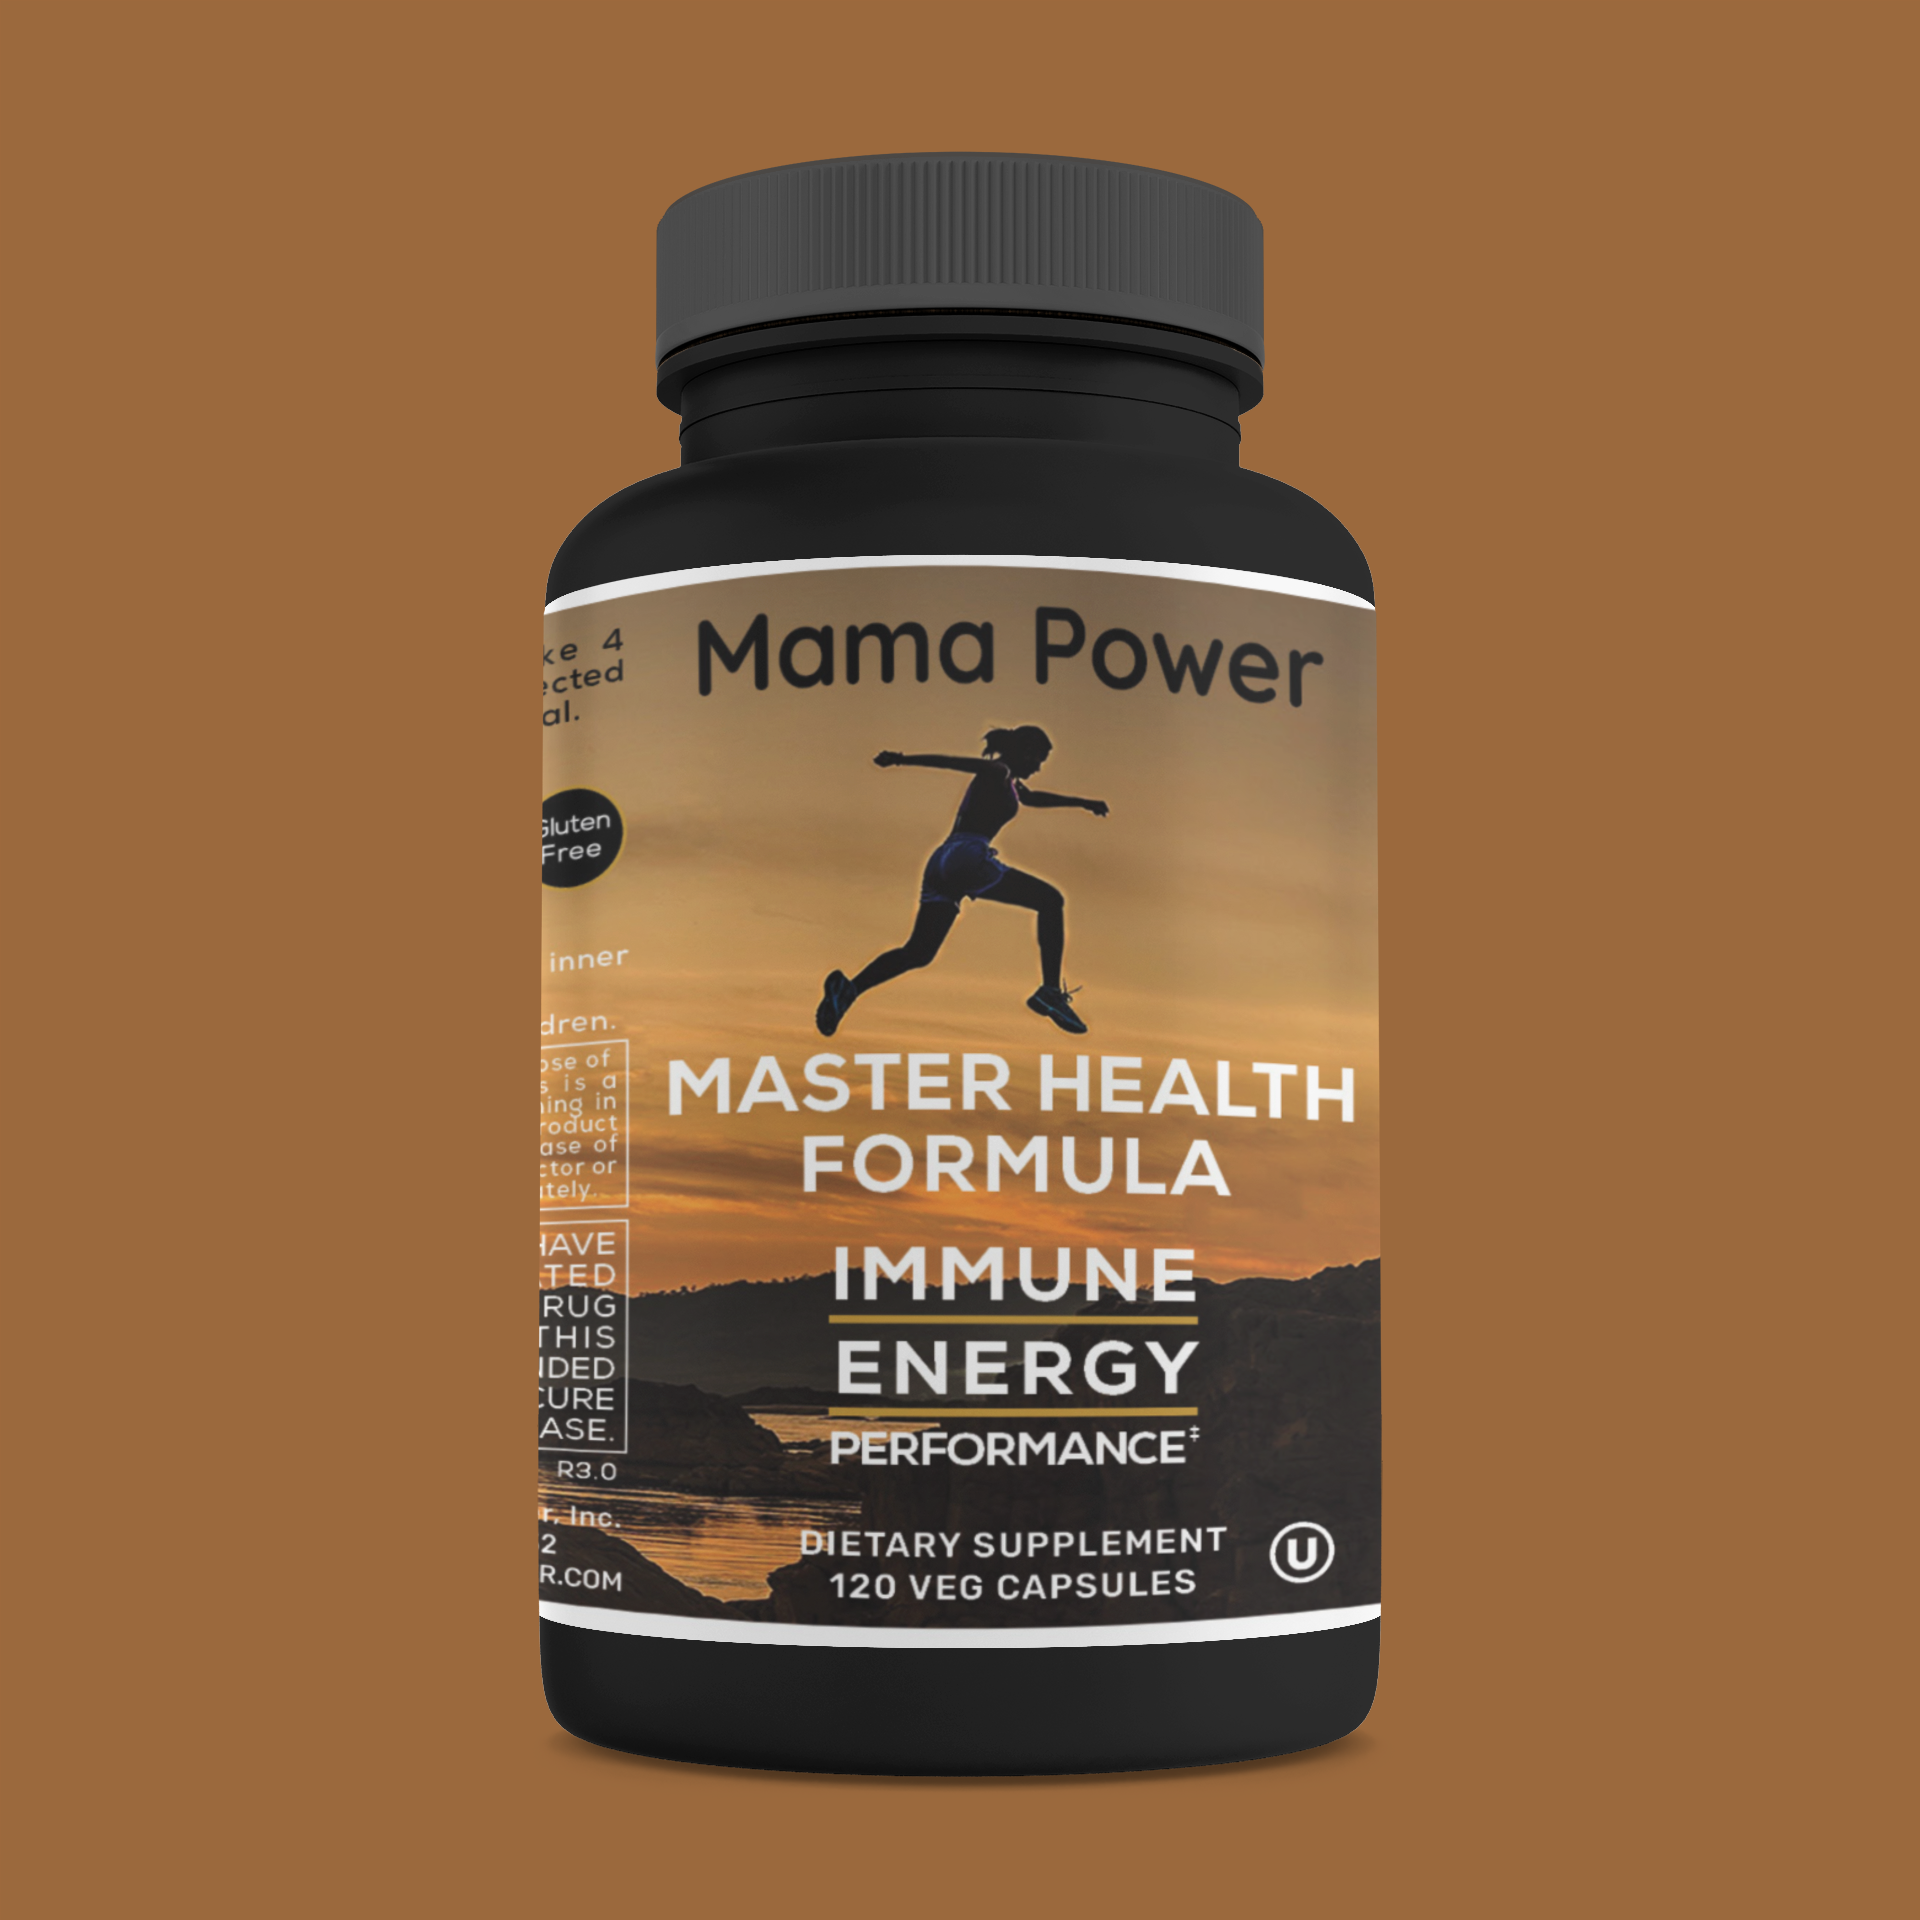 Mama Power - Supercharge Your Life